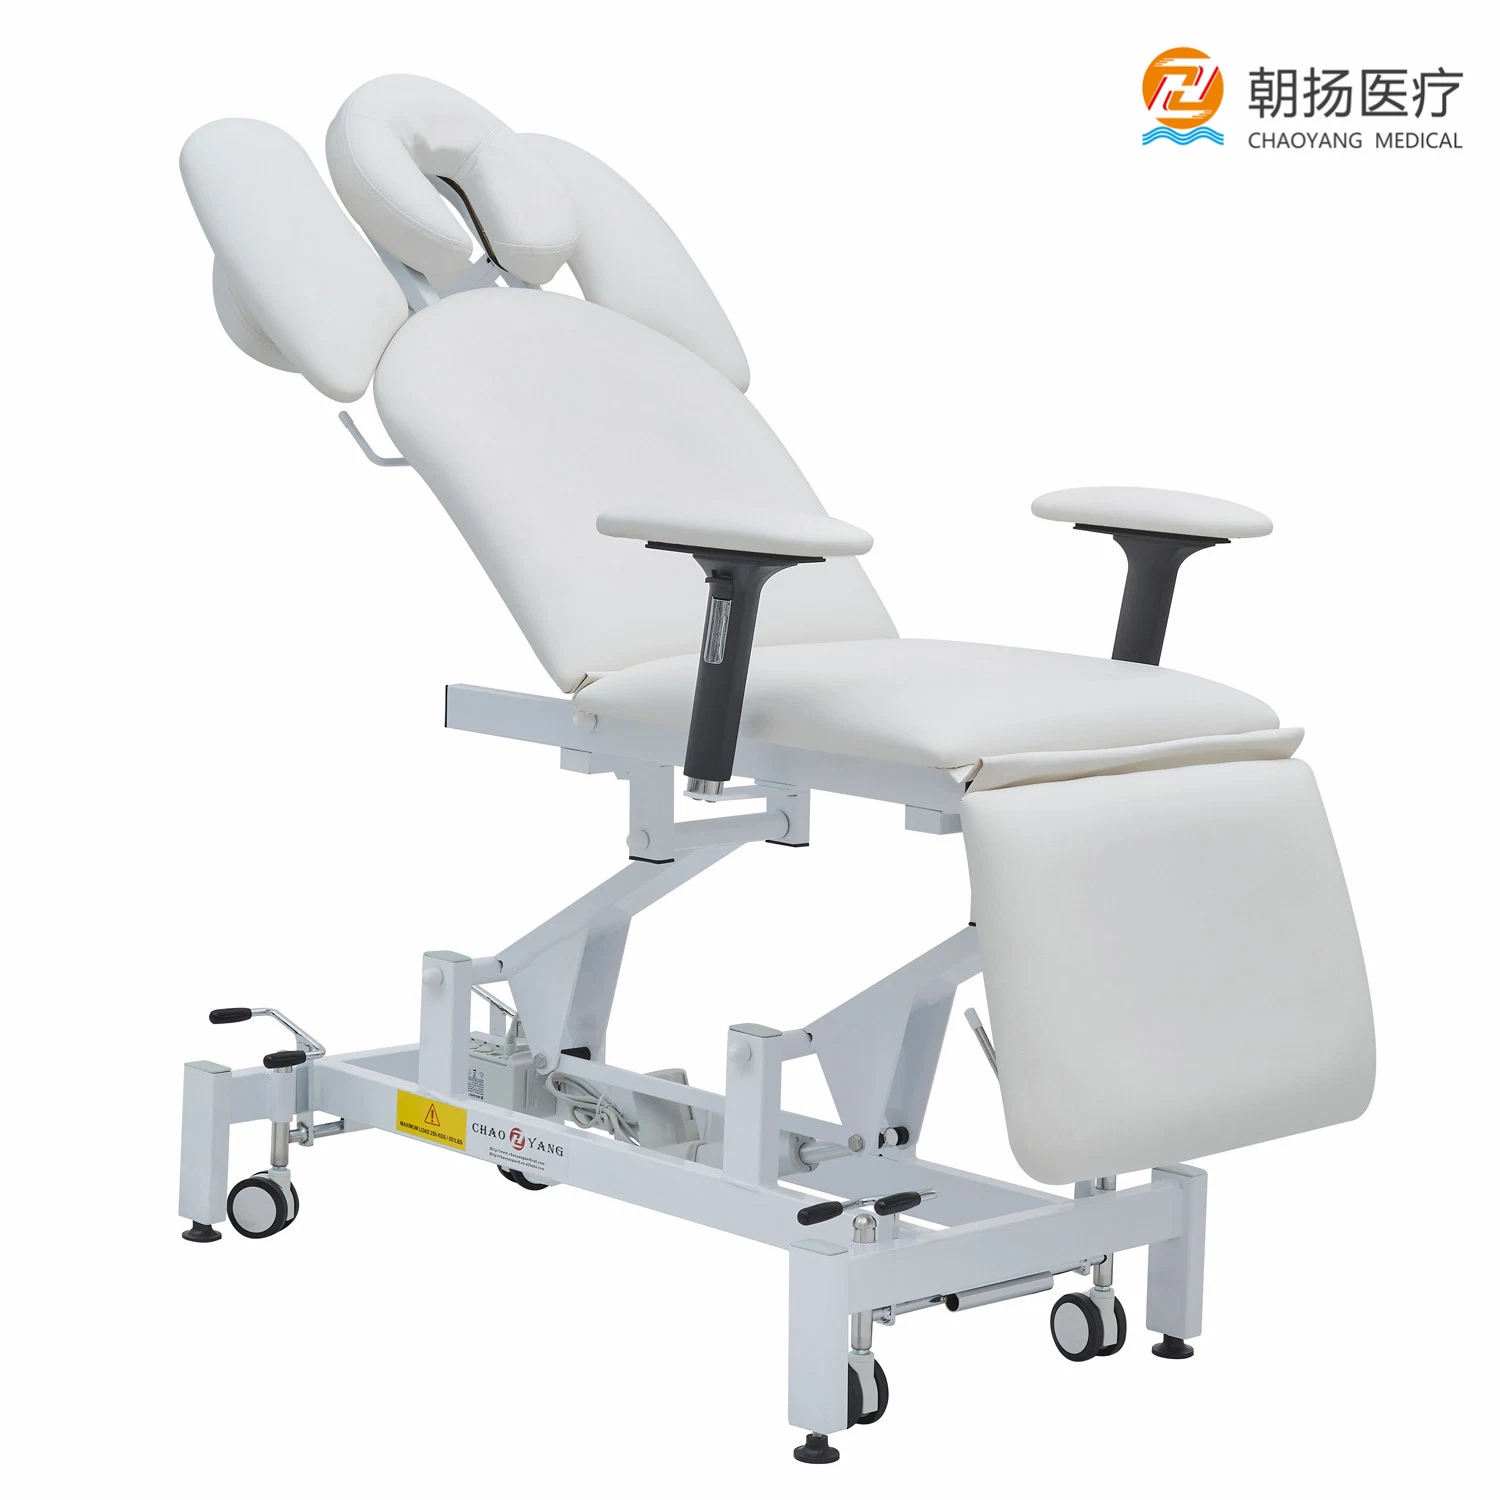 2022 New Reclining Pedicure SPA Foot Massage Chair Bed for Beauty Salon